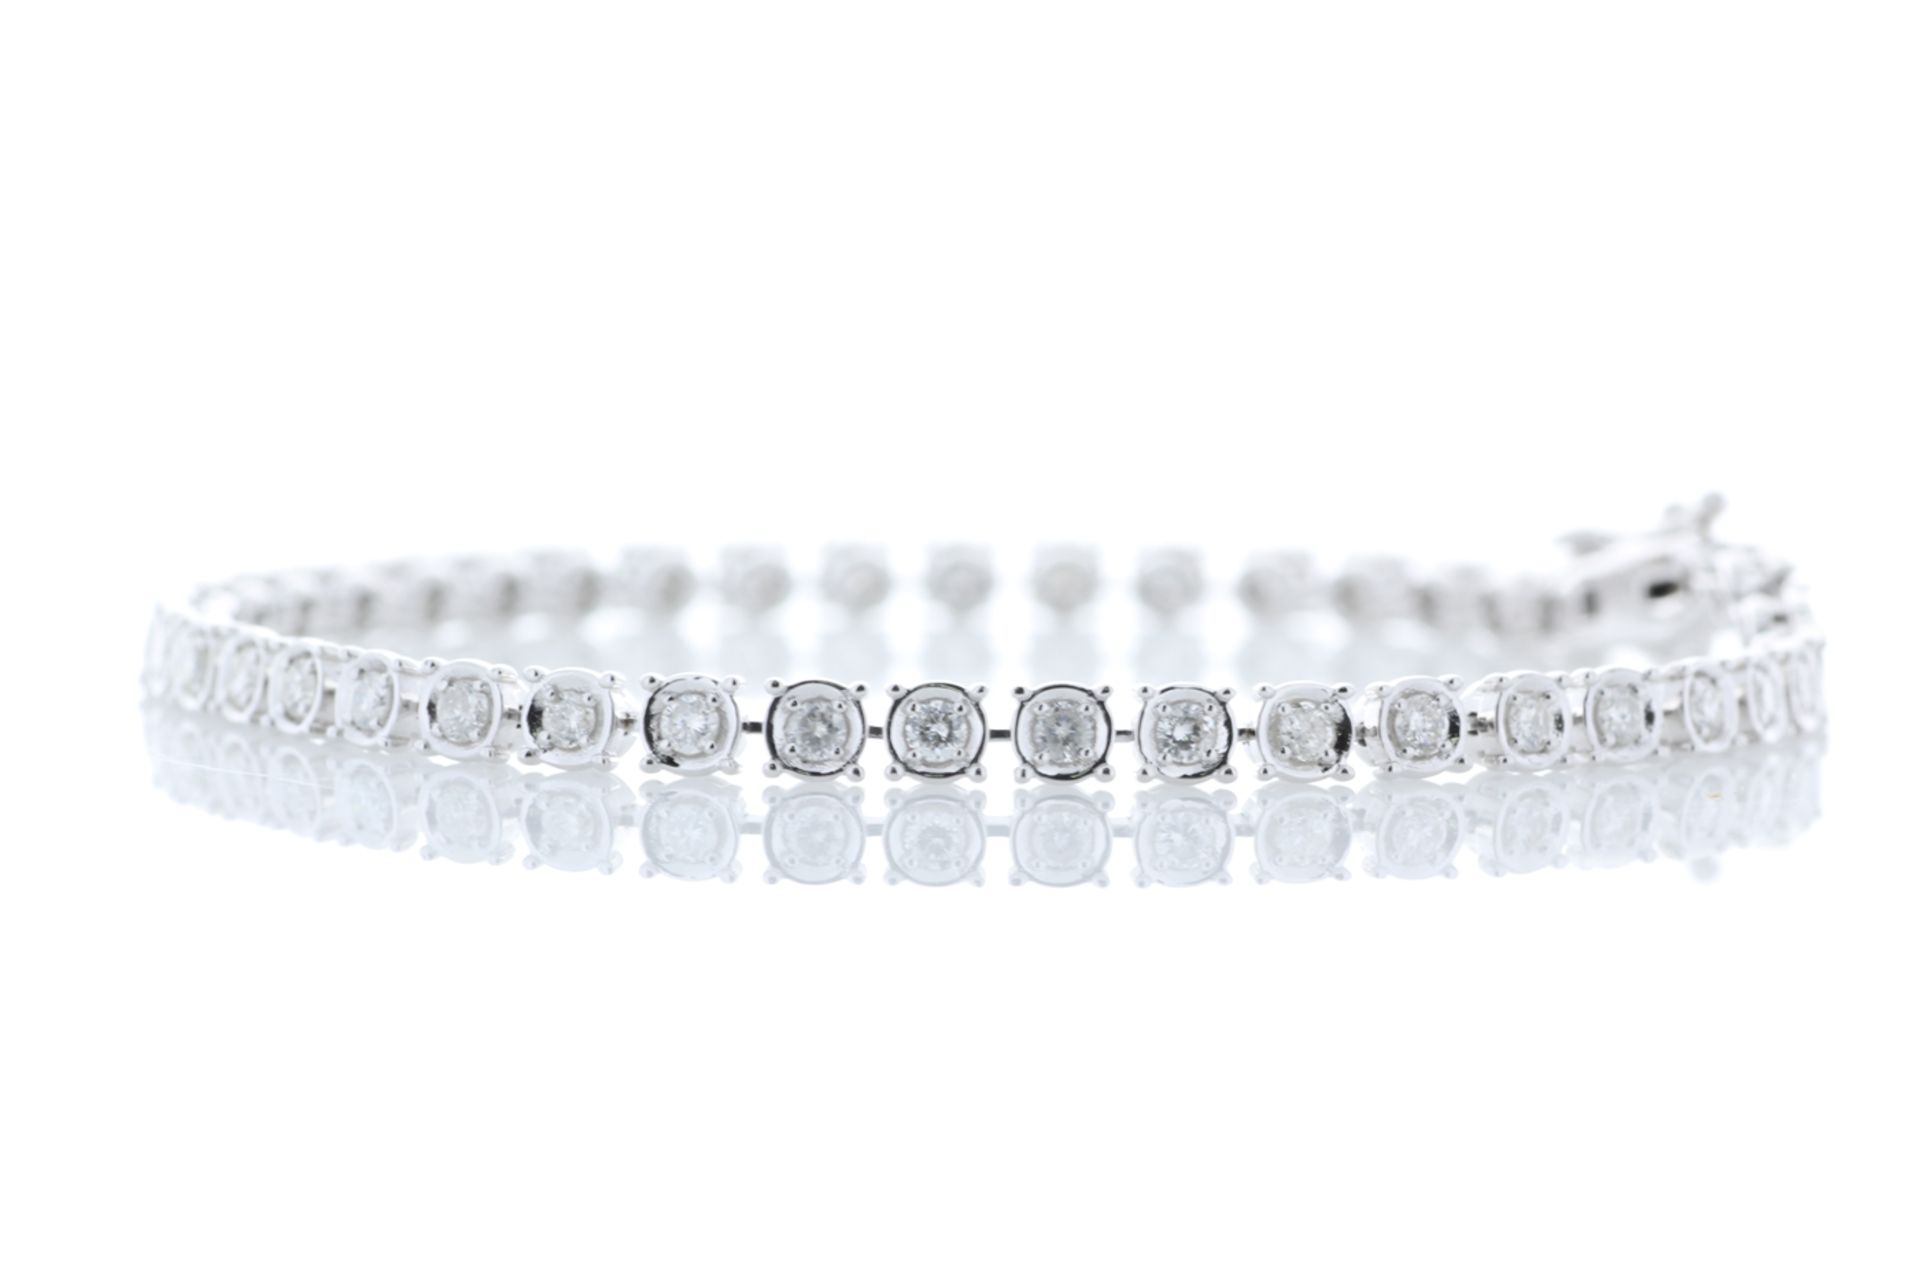 18ct White Gold Tennis Diamond Bracelet 1.50 Carats - Valued by GIE £19,220.00 - 18ct White Gold - Image 2 of 5